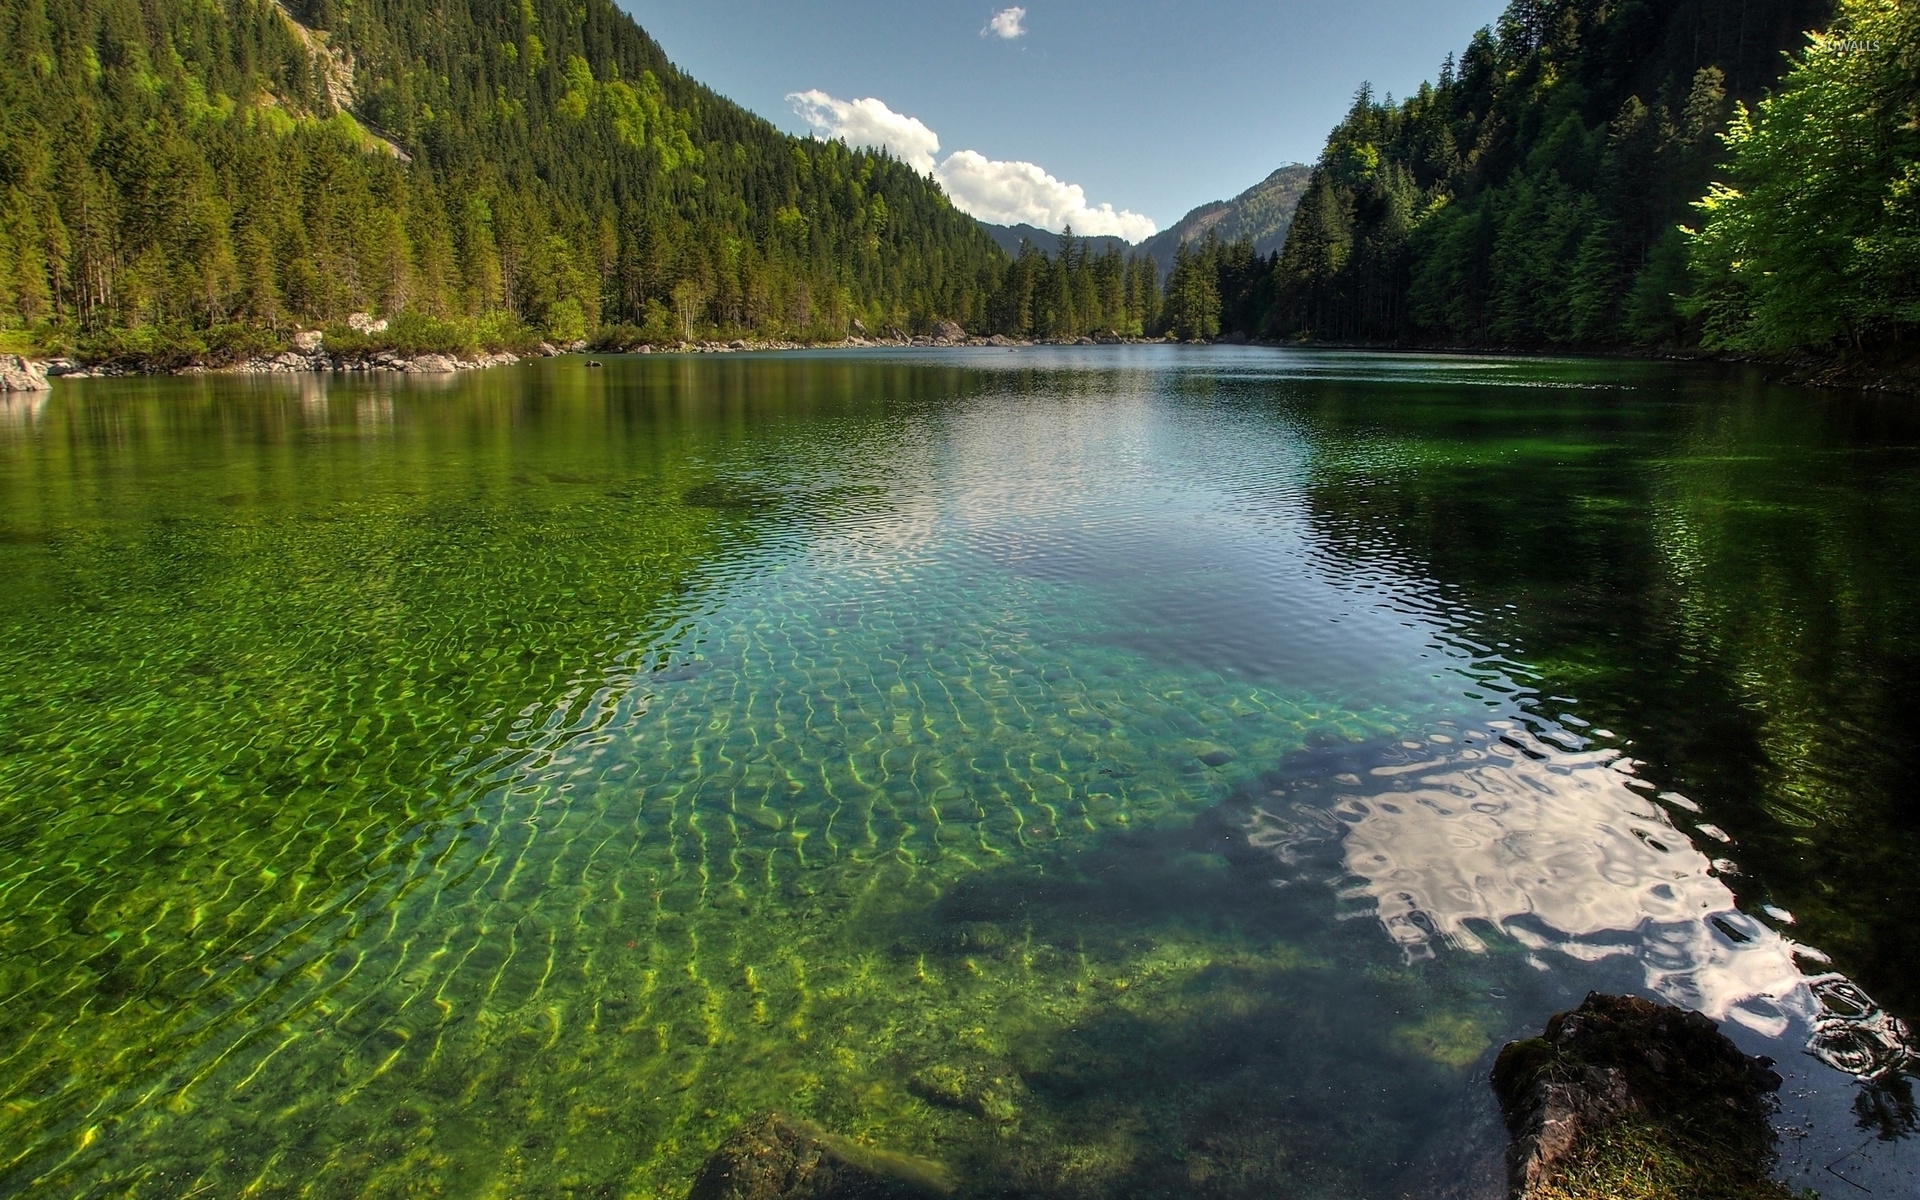 Clear water in the Crystal Lake wallpaper - Nature wallpapers - #51076